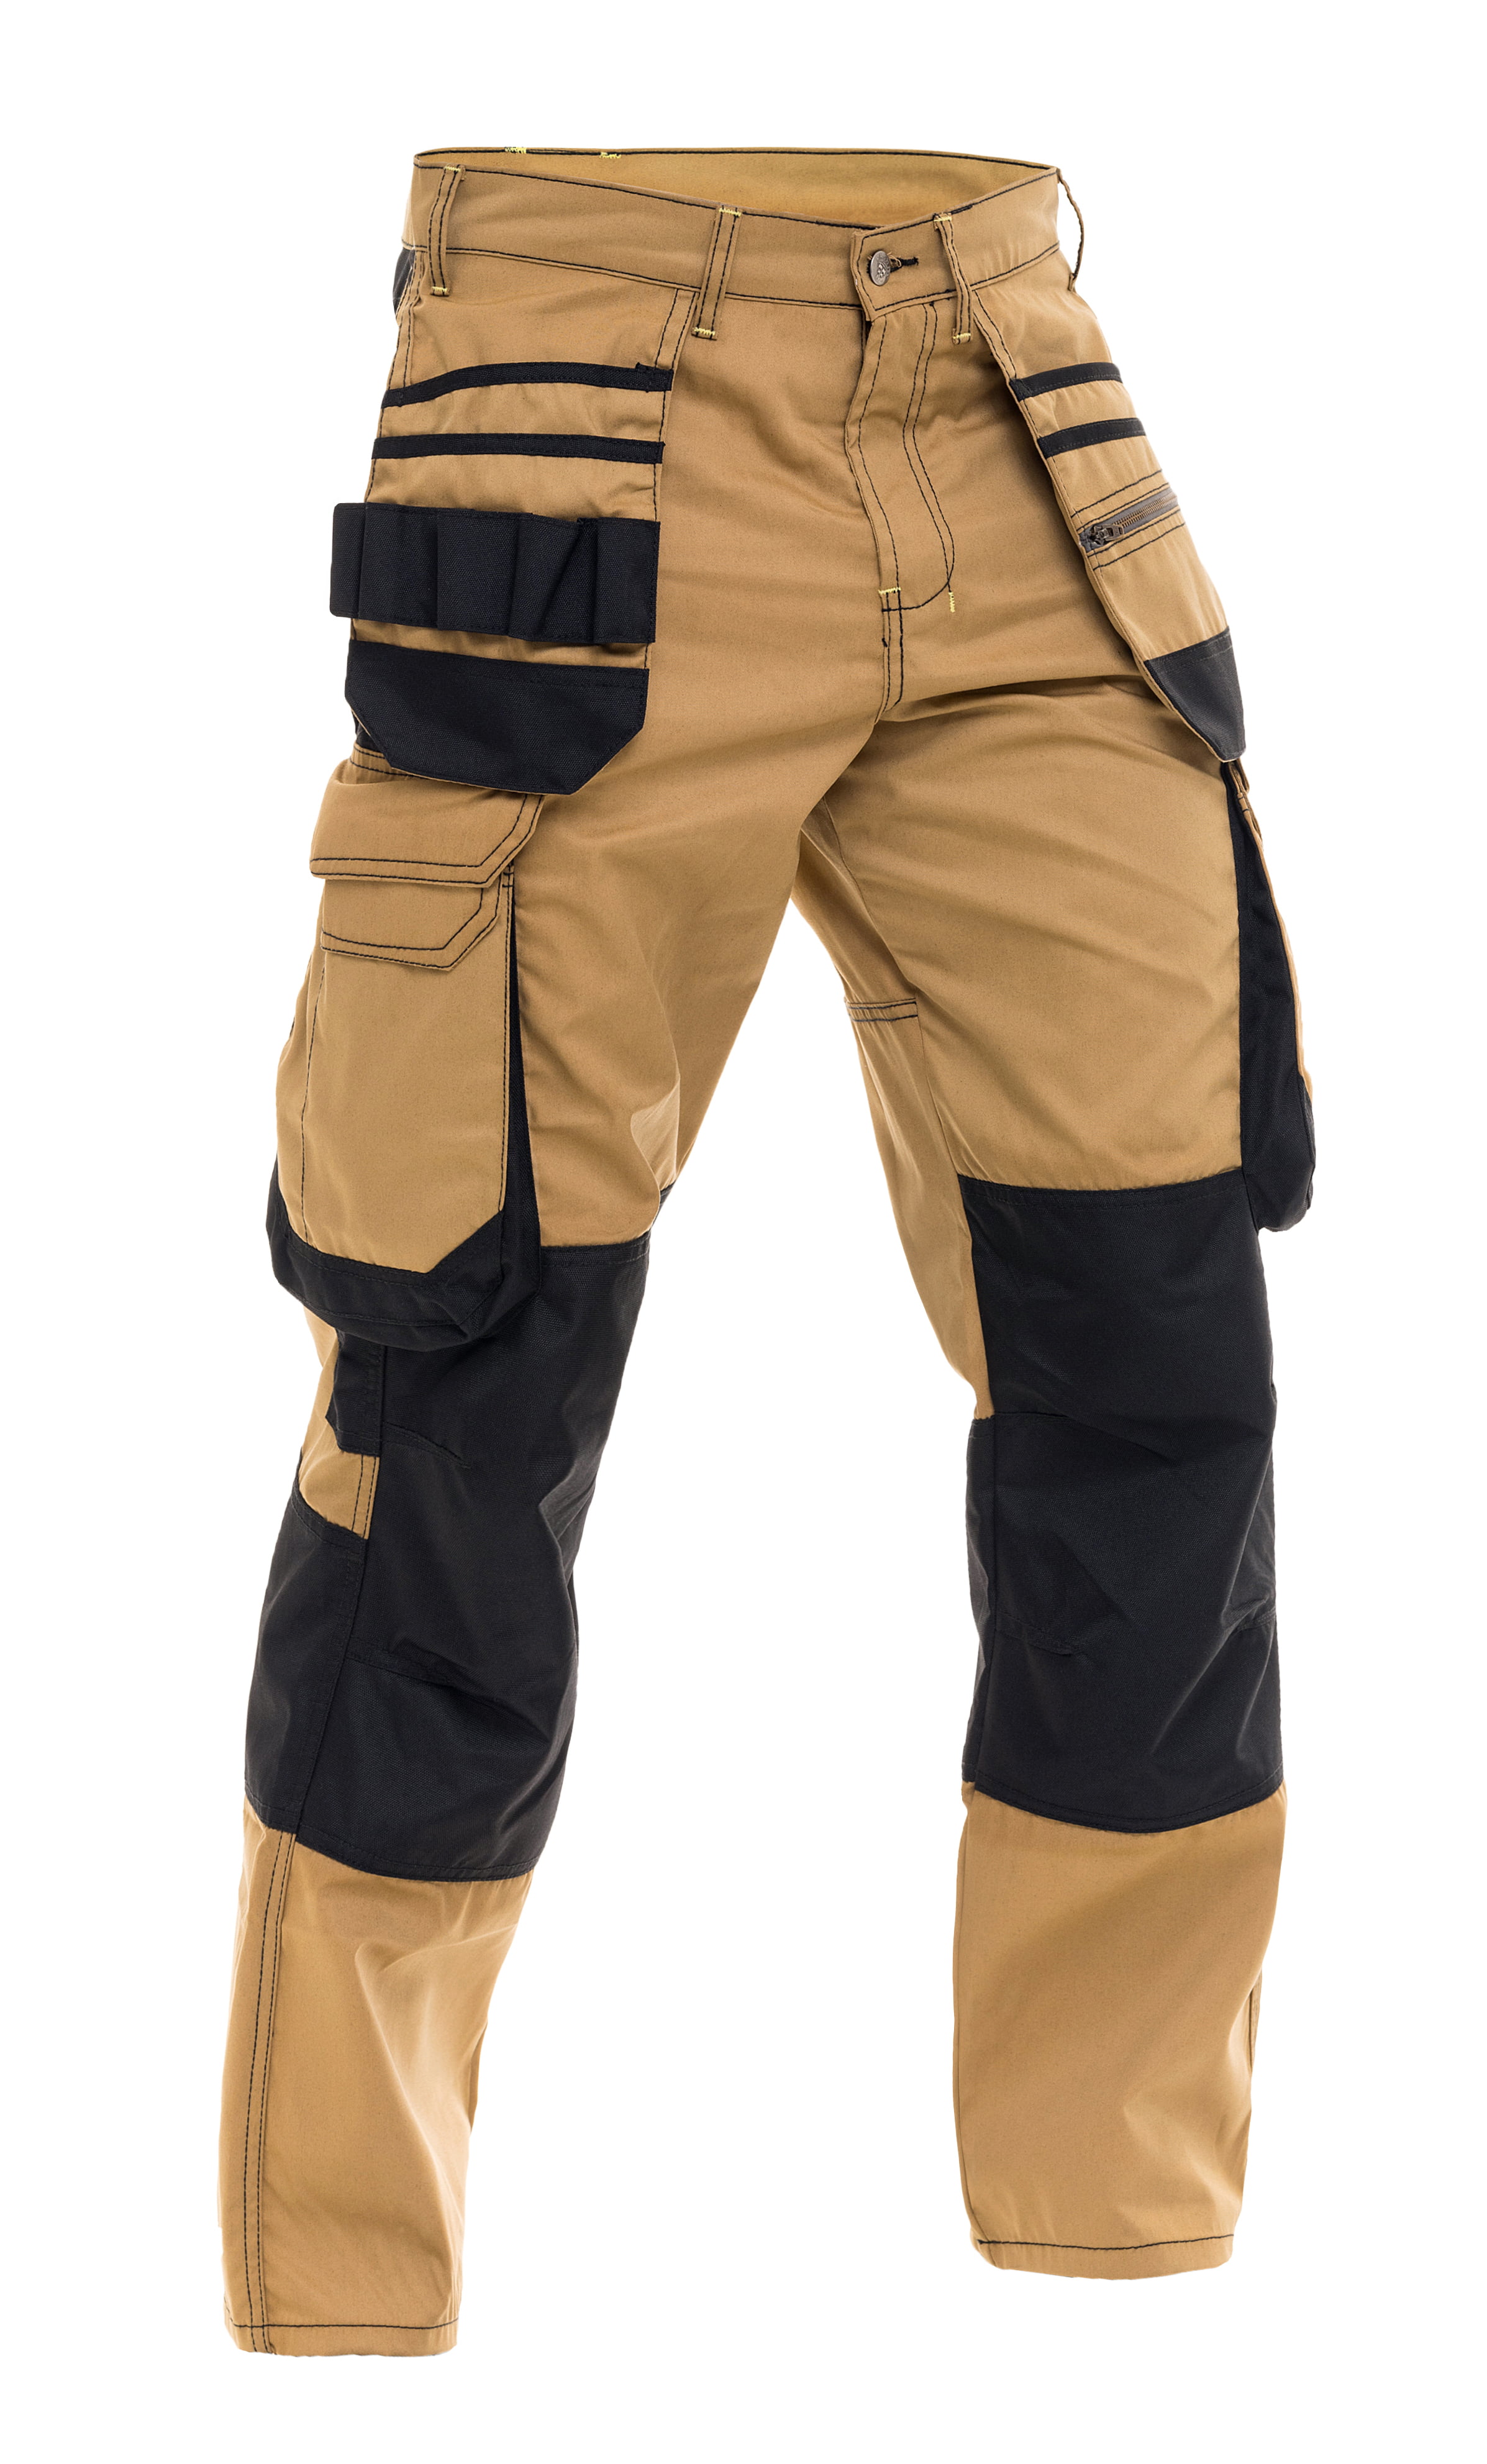 Mens Cargo Combat Work Trousers Army Military Security Multi Pocket Heavy  Duty  eBay